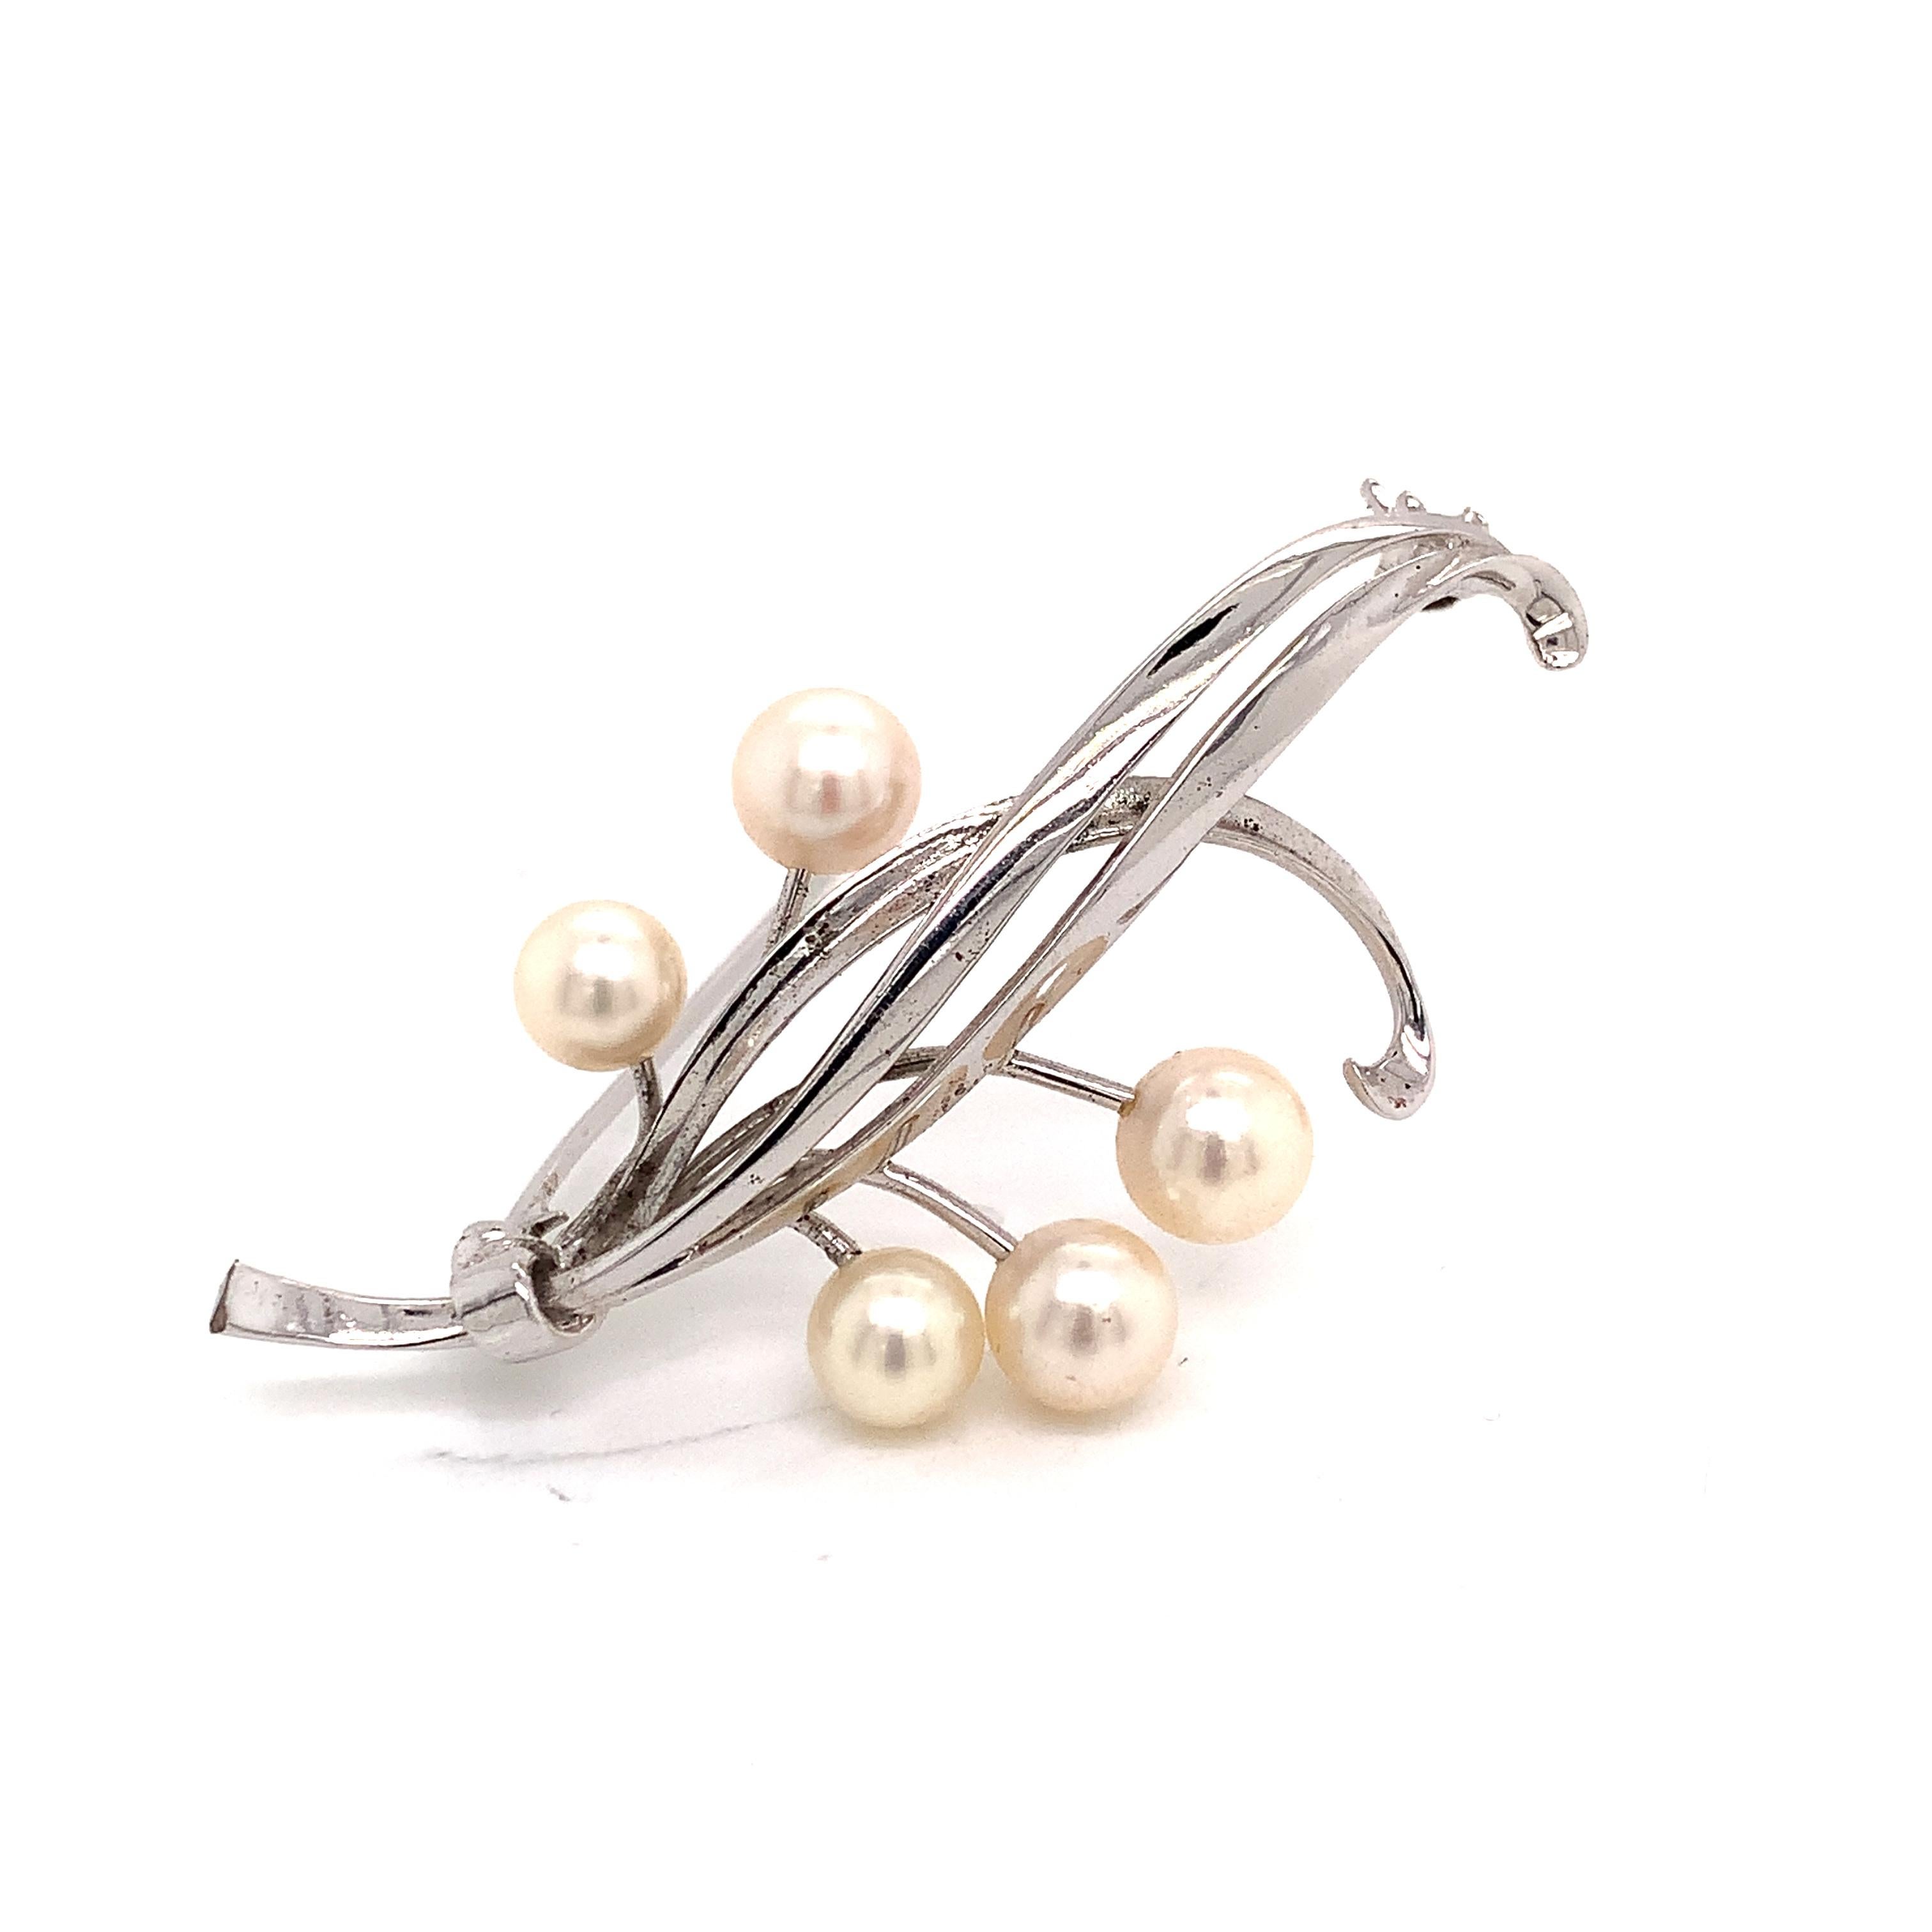 Mikimoto Estate Akoya Pearl Brooch Pin Sterling Silver 6.6 mm 5.43 gr M185

This elegant Authentic Mikimoto Estate sterling silver brooch has 5 Saltwater Akoya Cultured Pearls ranging in size from 5.8 - 6.6 mm with a weight of 5.43 Grams.
TRUSTED